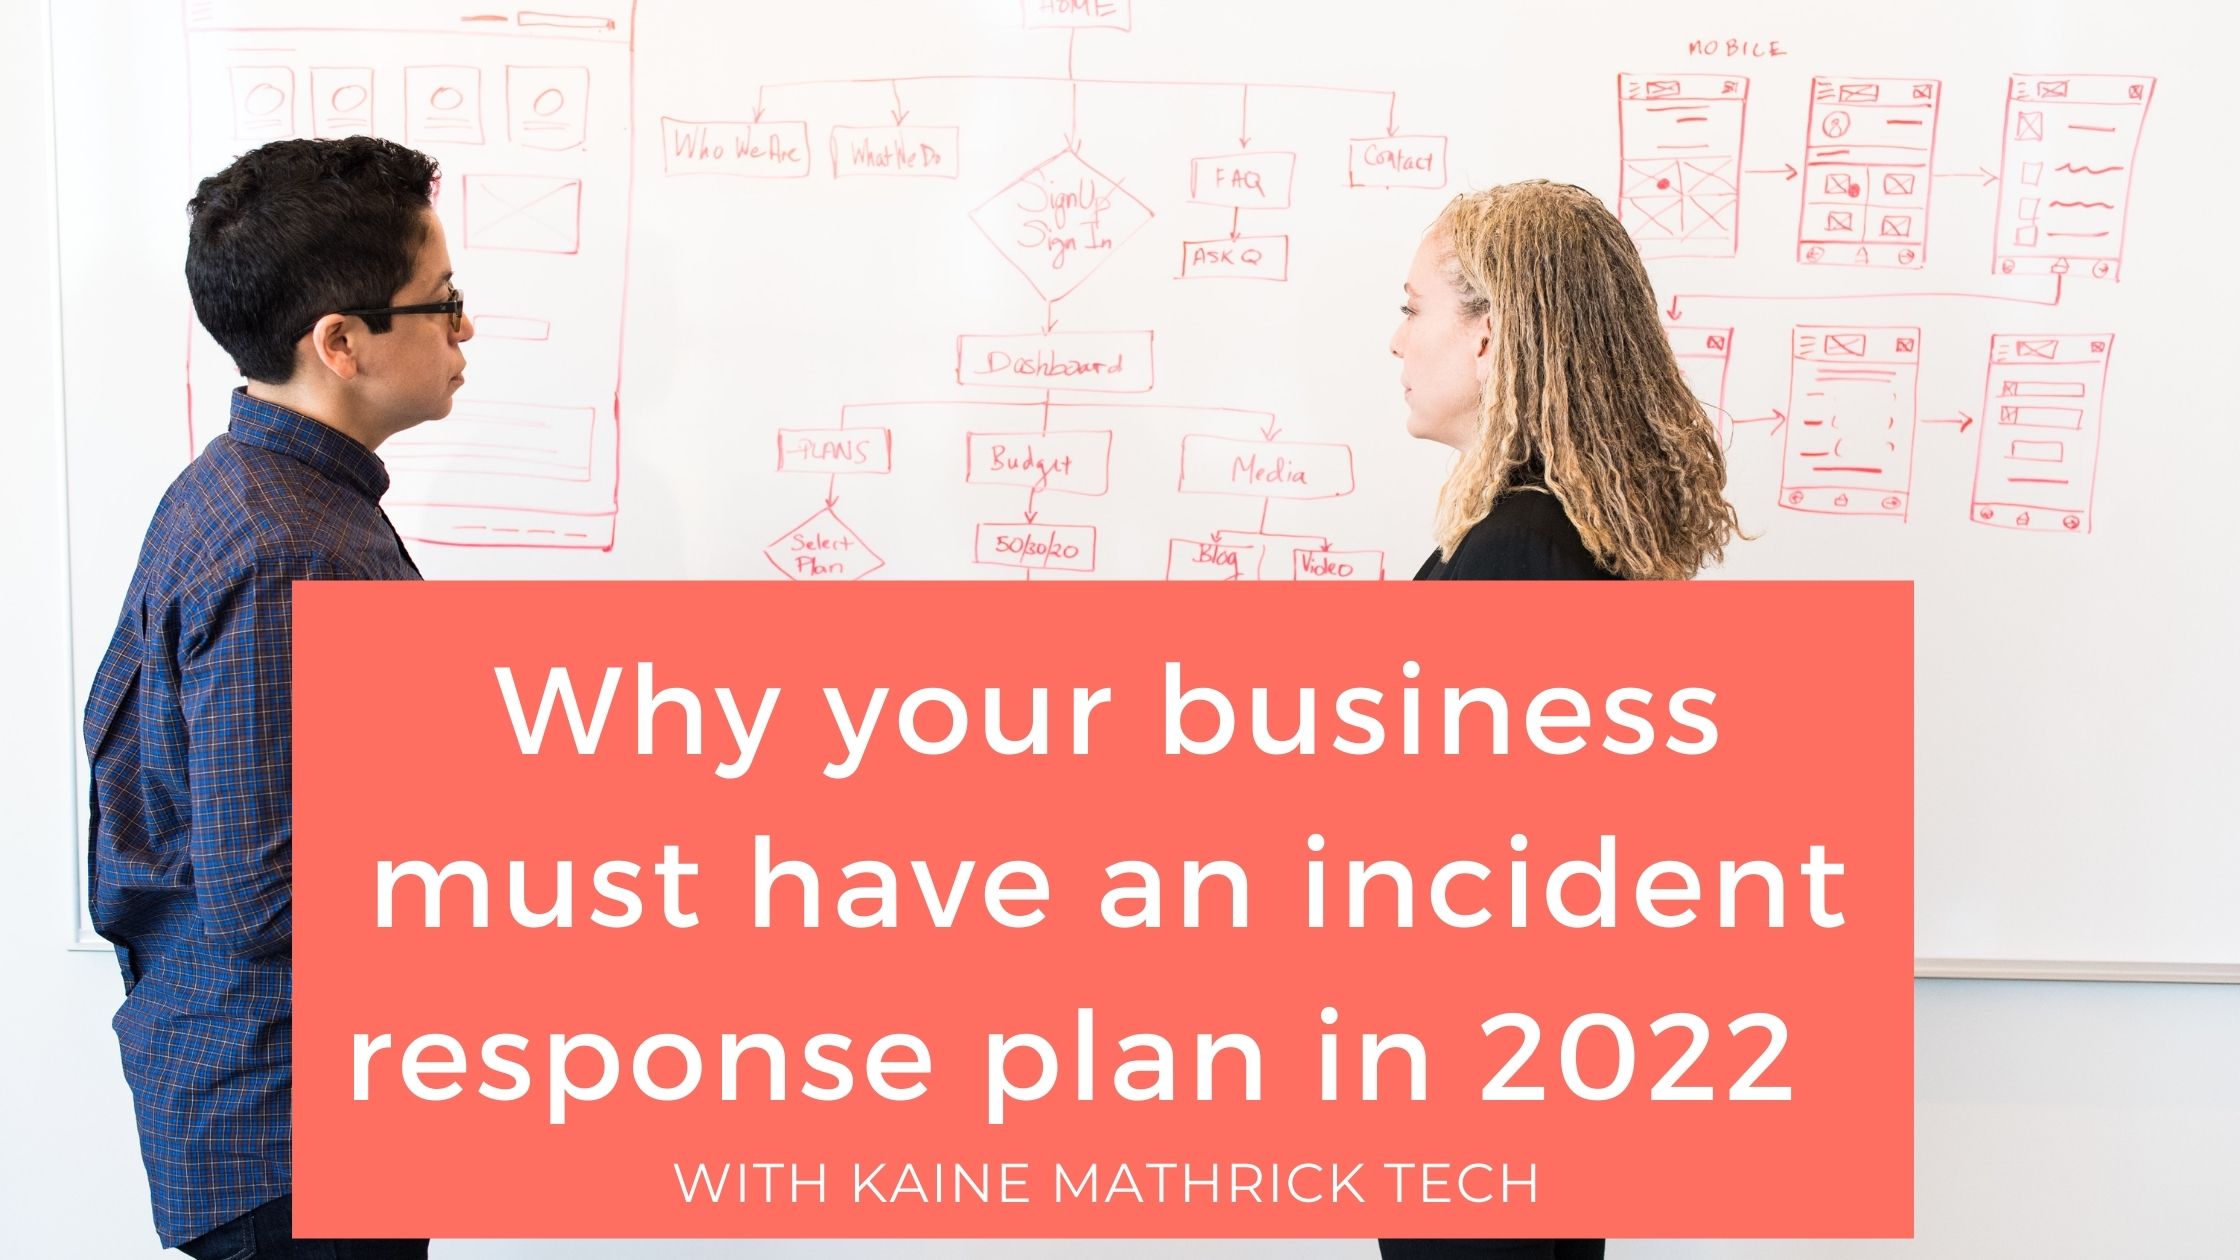 Why your business must have an Incident Response Plan in 2022